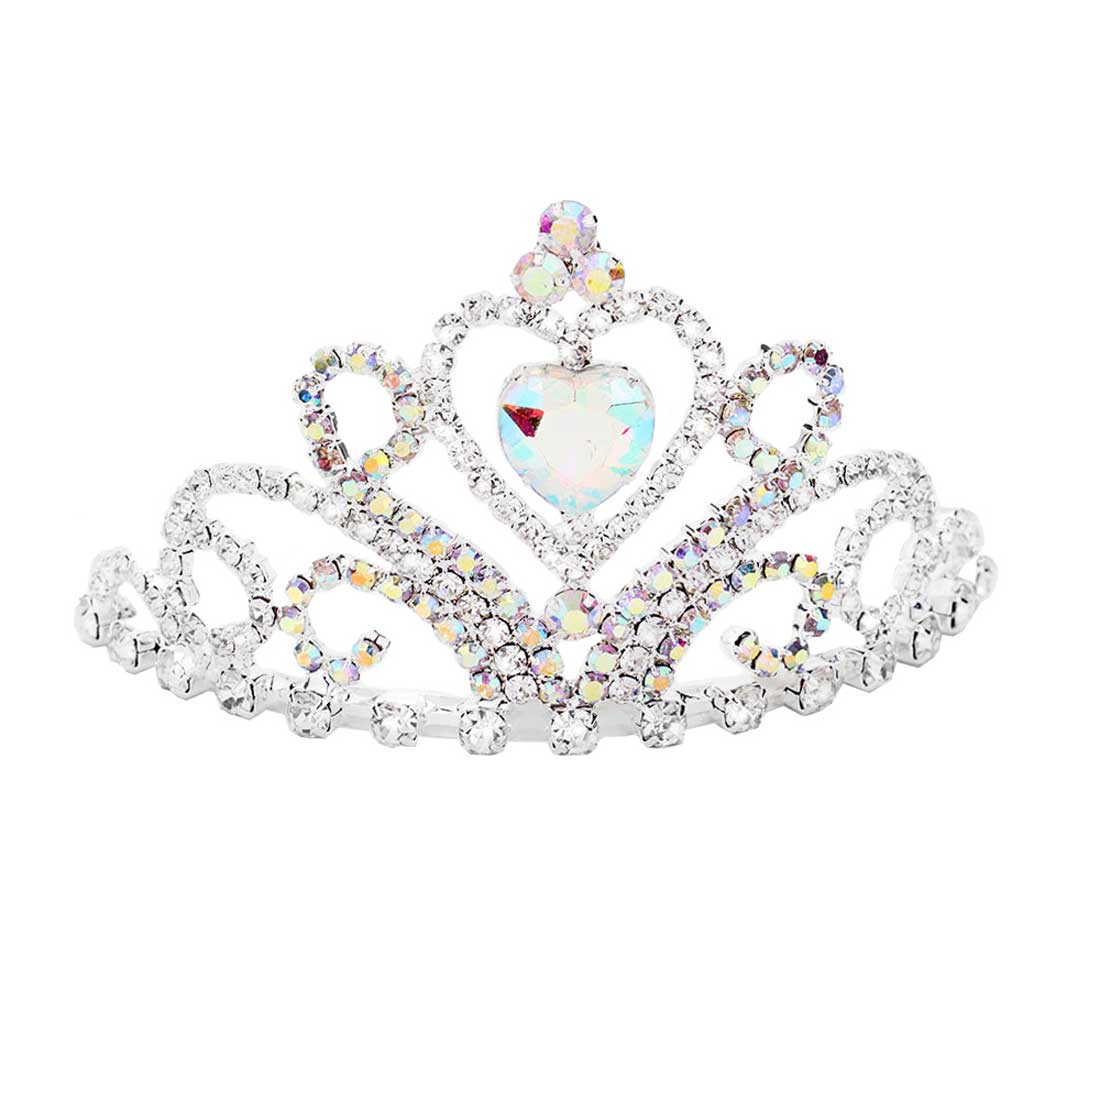 AB Silver Heart Crystal Rhinestone Princess Mini Tiara, this tiara features precious crystal rhinestone and an artistic design. Perfect for adding just the right amount of shimmer & shine, will add a touch of class, beauty and style to your special events. Suitable for Wedding, Engagement, Prom, Dinner Party, Birthday Party, Any Occasion You Want to Be More Charming.